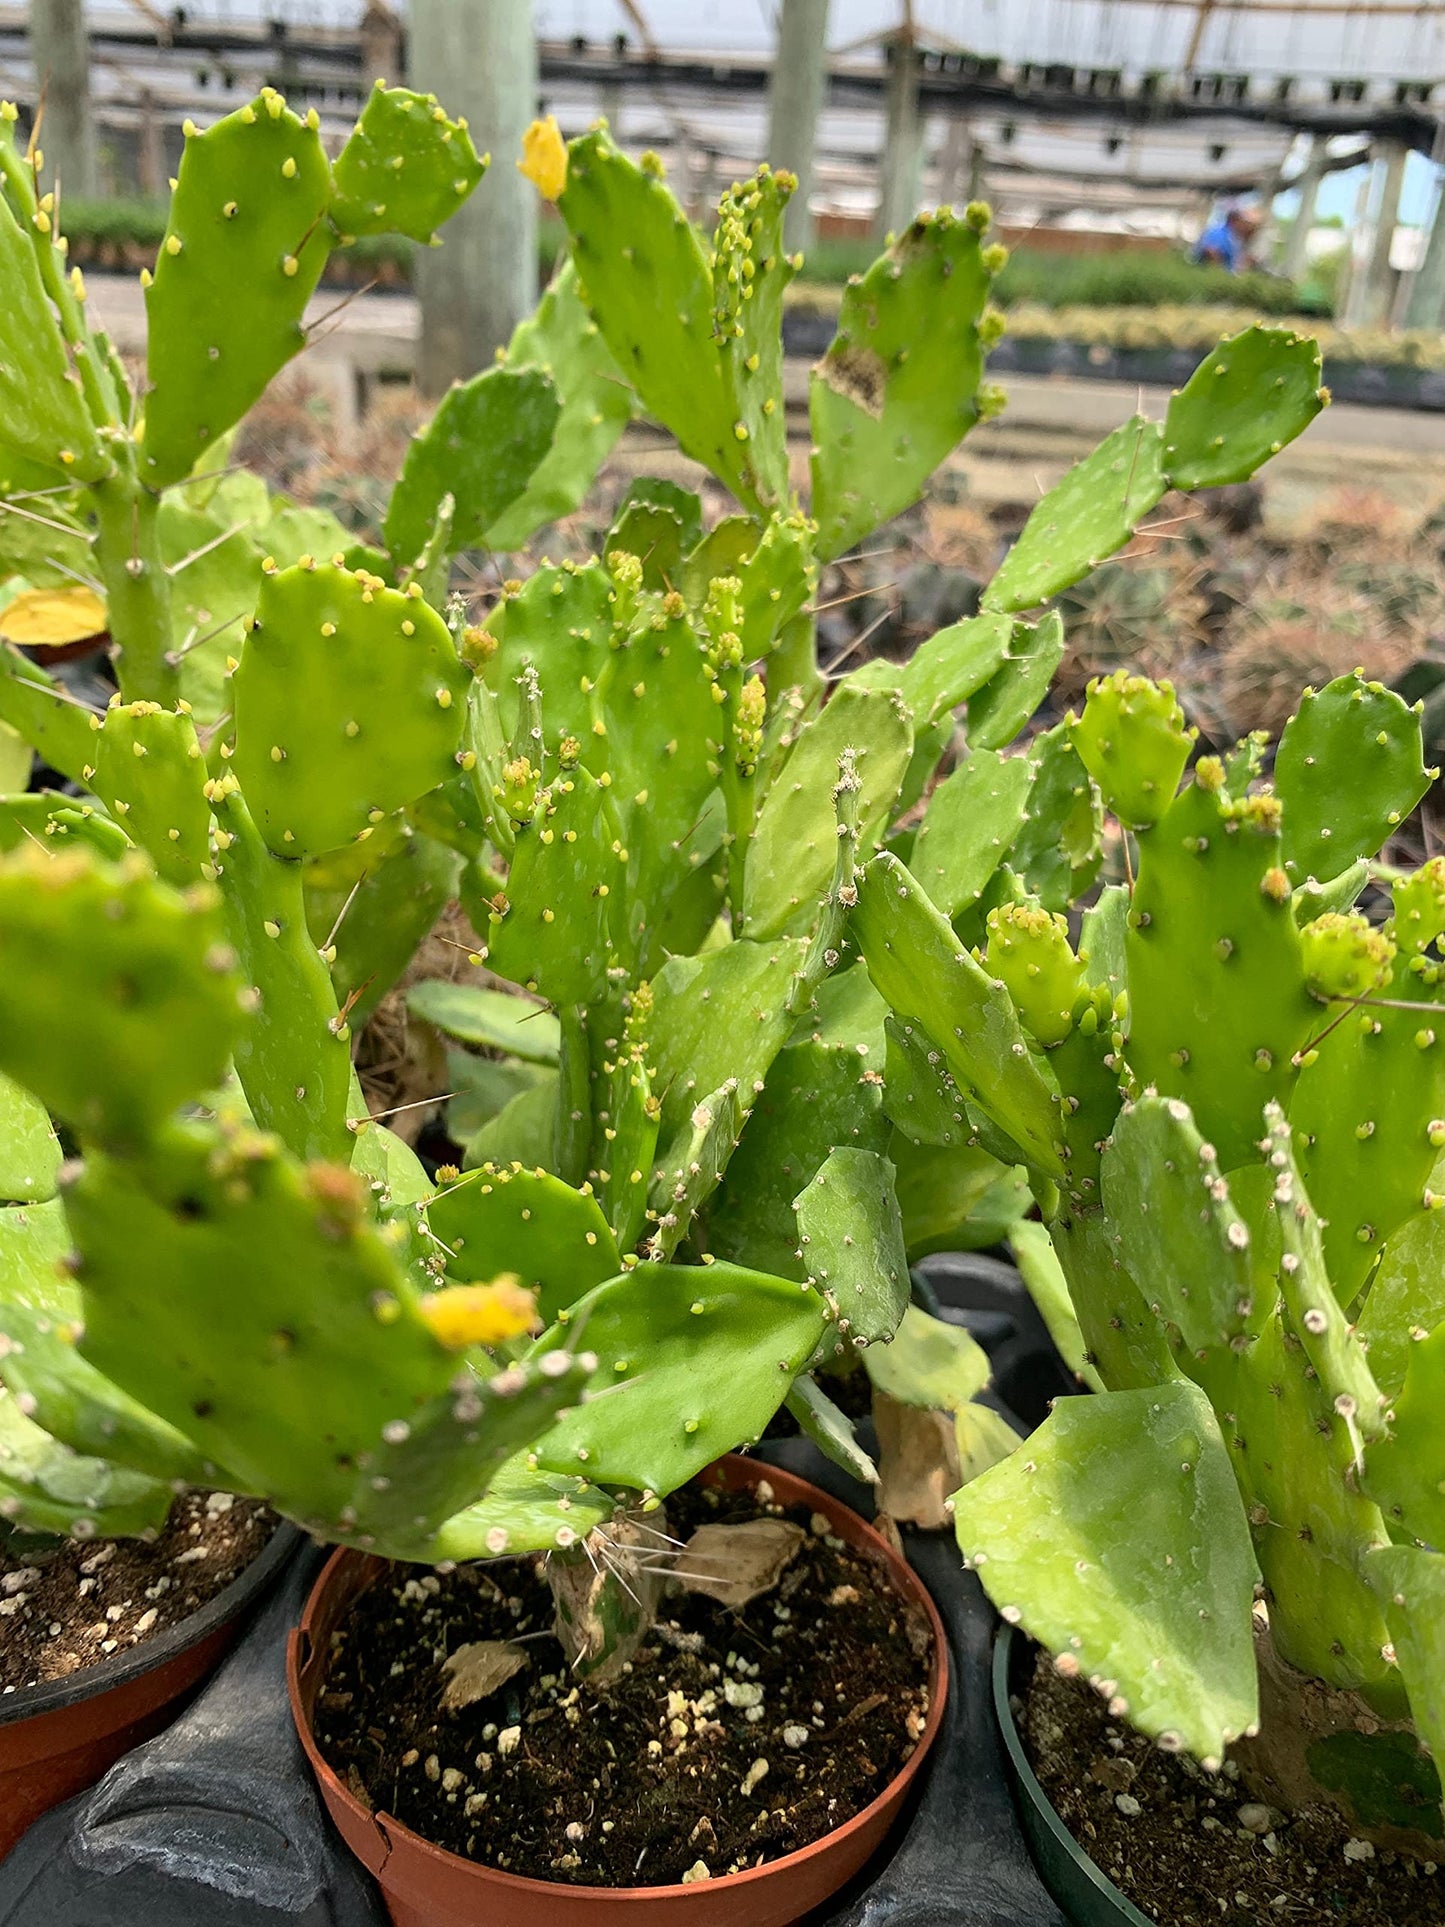 Brazilian Prickly Pear Extra Large Cactus in a 4 inch Pot Brasiliopuntia Brasiliensis Nopal Opuntia Cacti Flat-Stemmed Well Rooted Live Rare, Natural